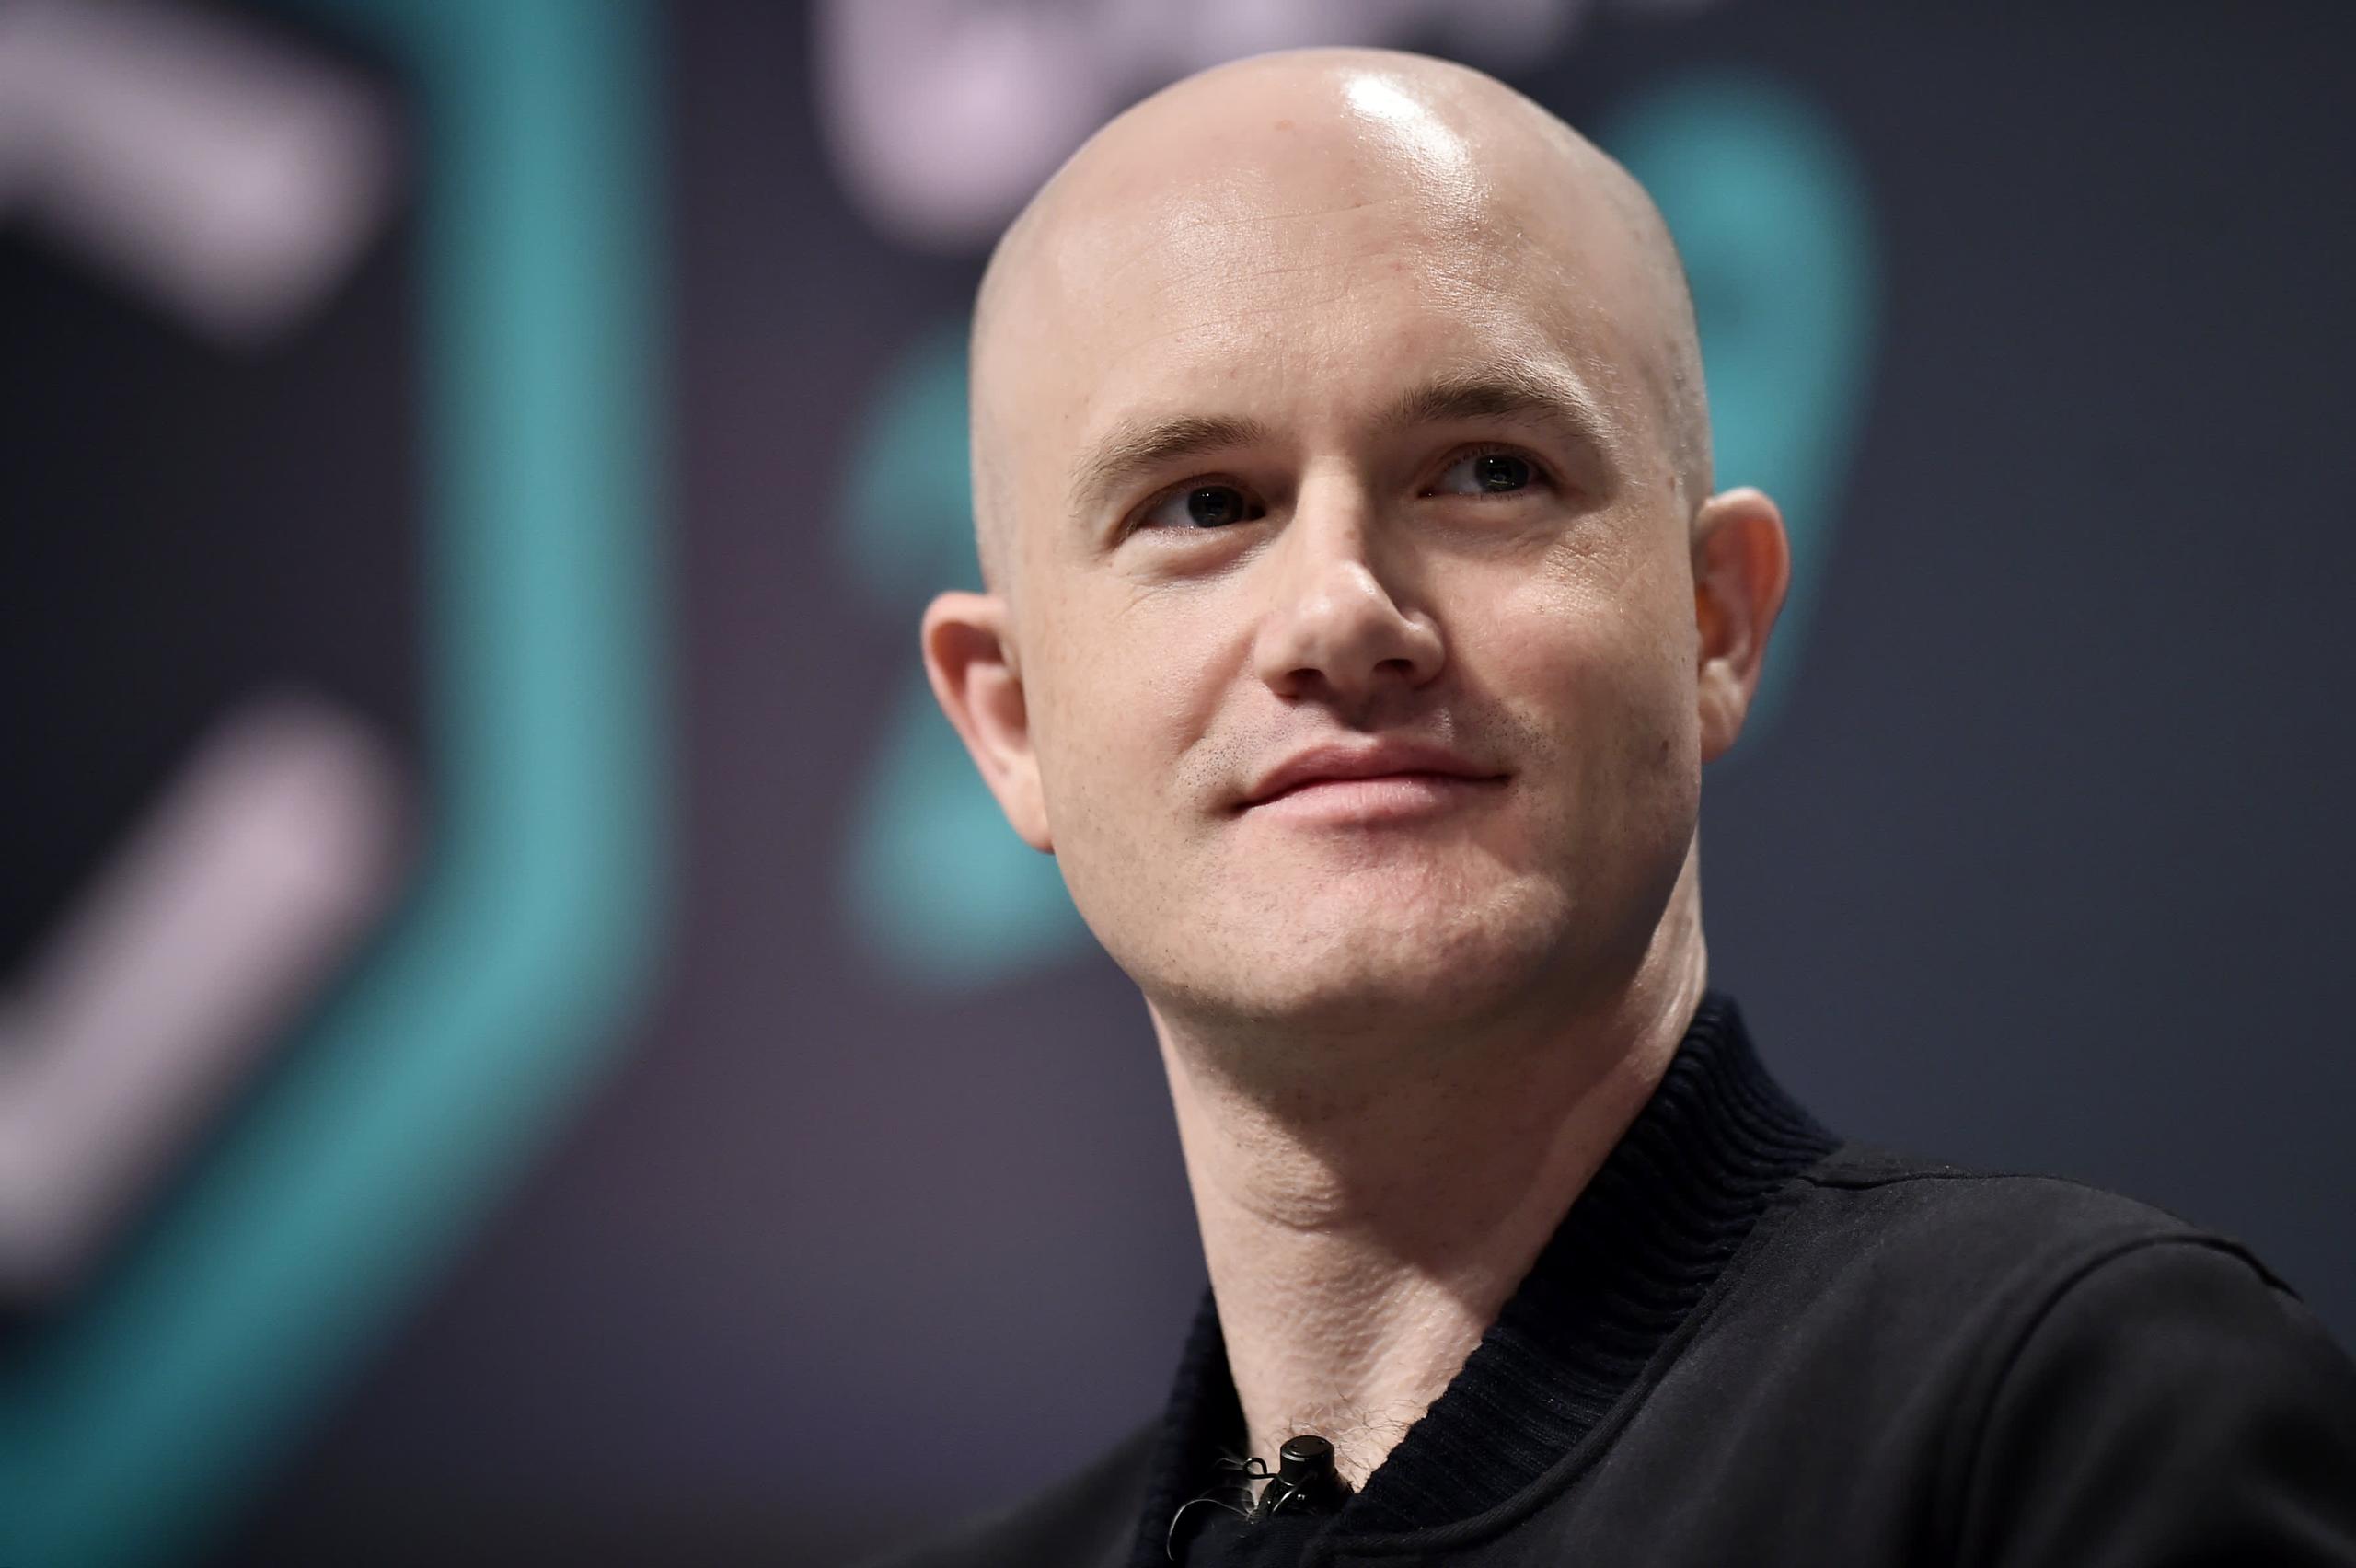 According to CEO Brian Armstrong, Coinbase could relocate from the US to elsewhere due to regulatory uncertainty